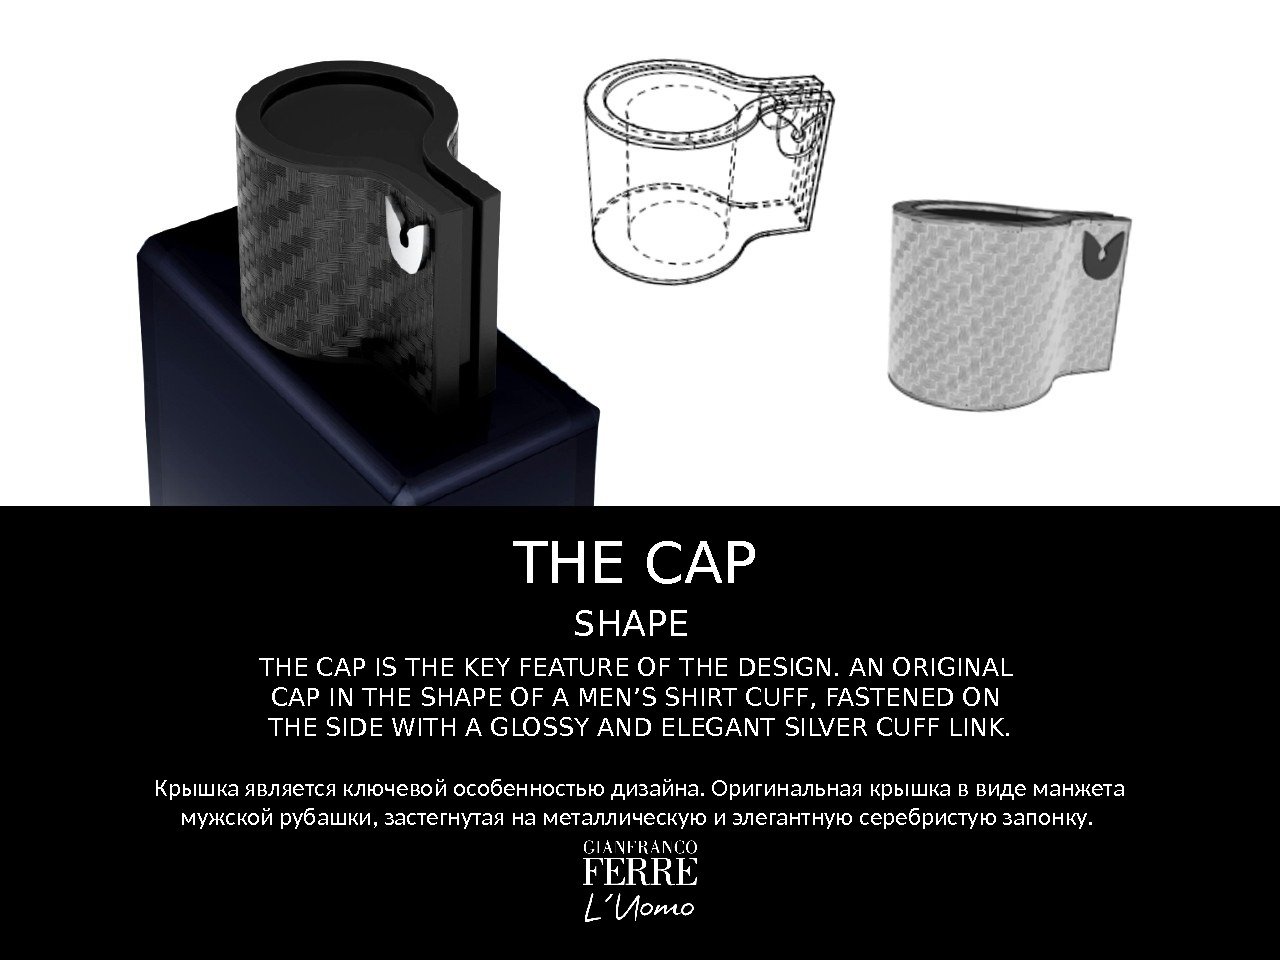 THE CAP IS THE KEY FEATURE OF THE DESIGN. AN ORIGINAL CAP IN THE